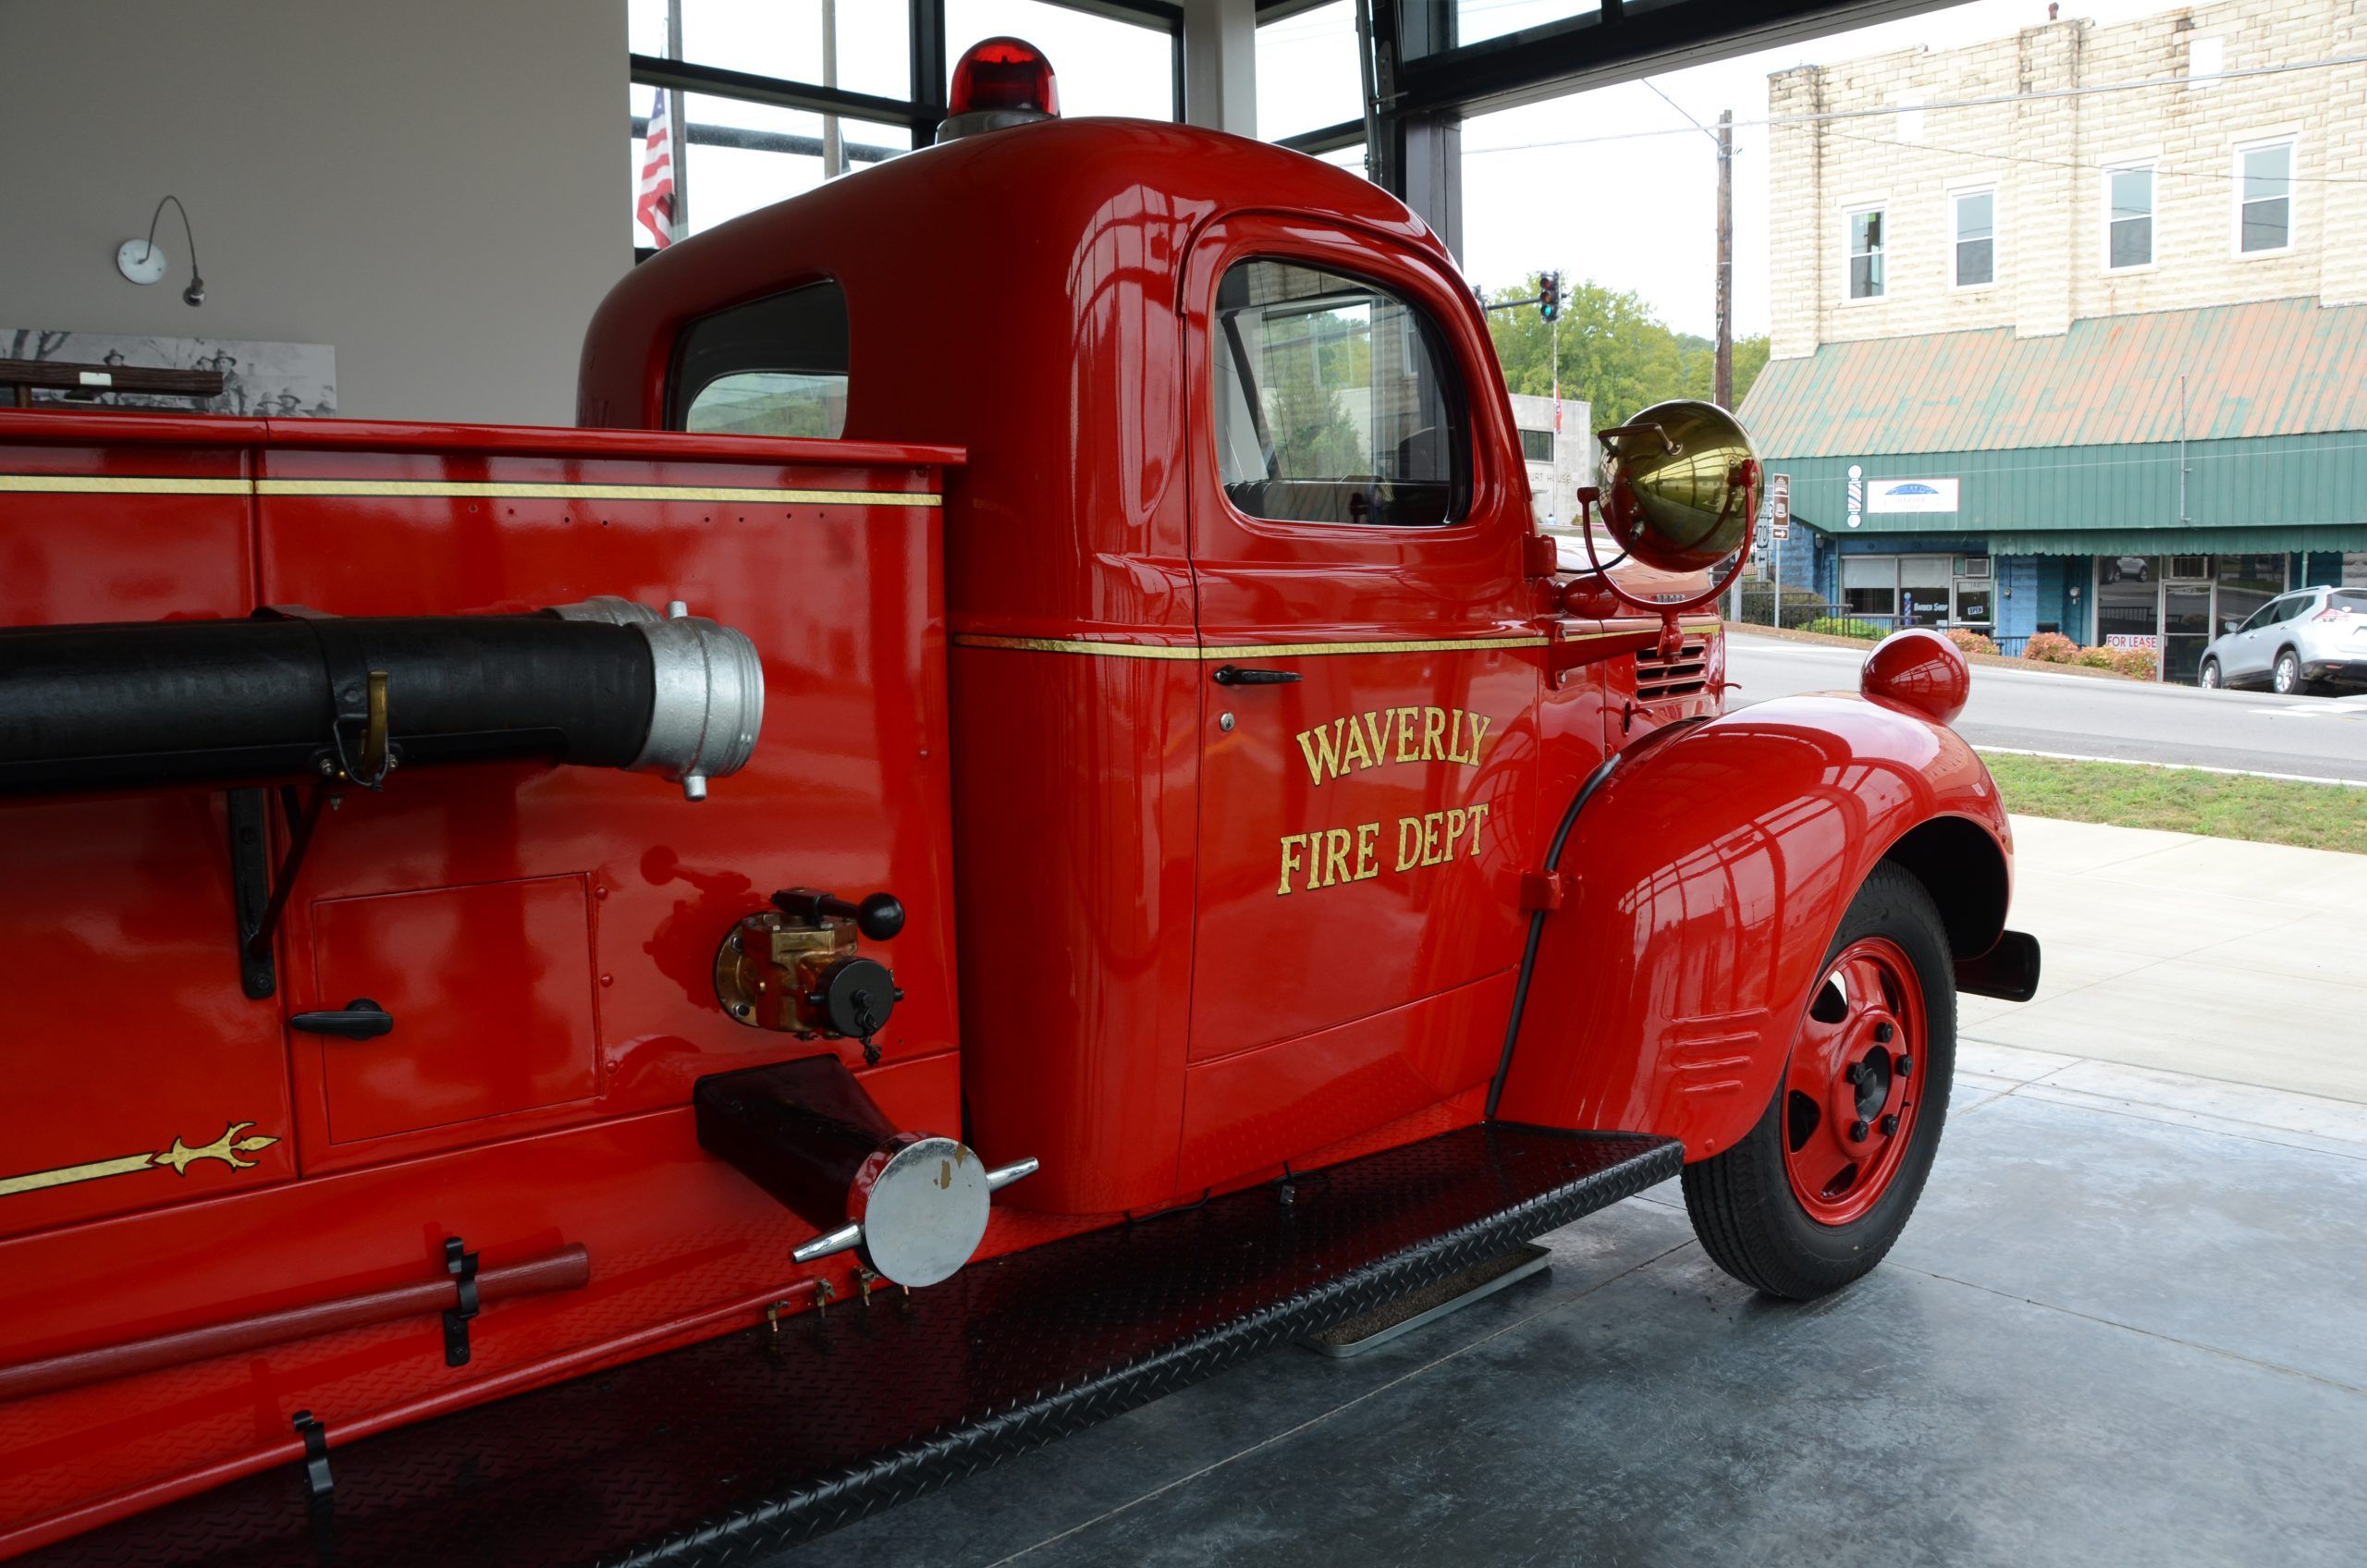 Engine 1 in City Hall